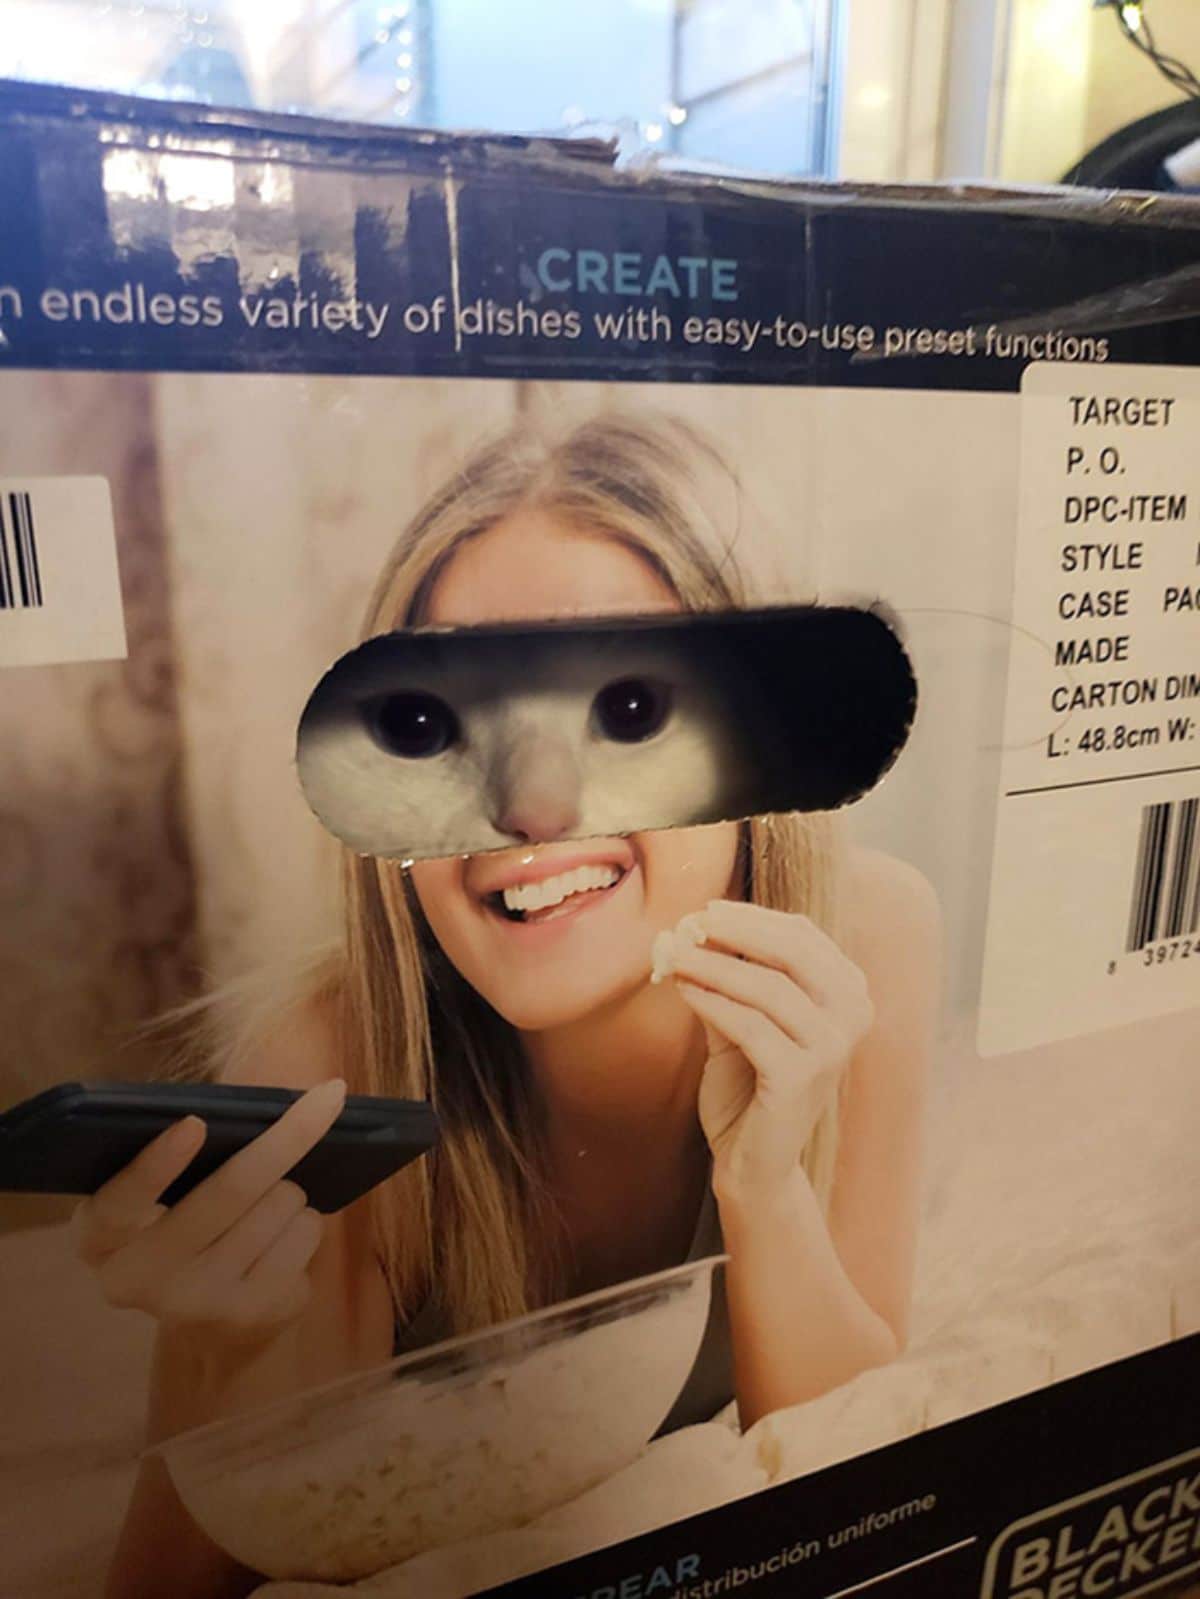 white cat's eyes showing in a gap in a cardboard box where a woman's eyes should be